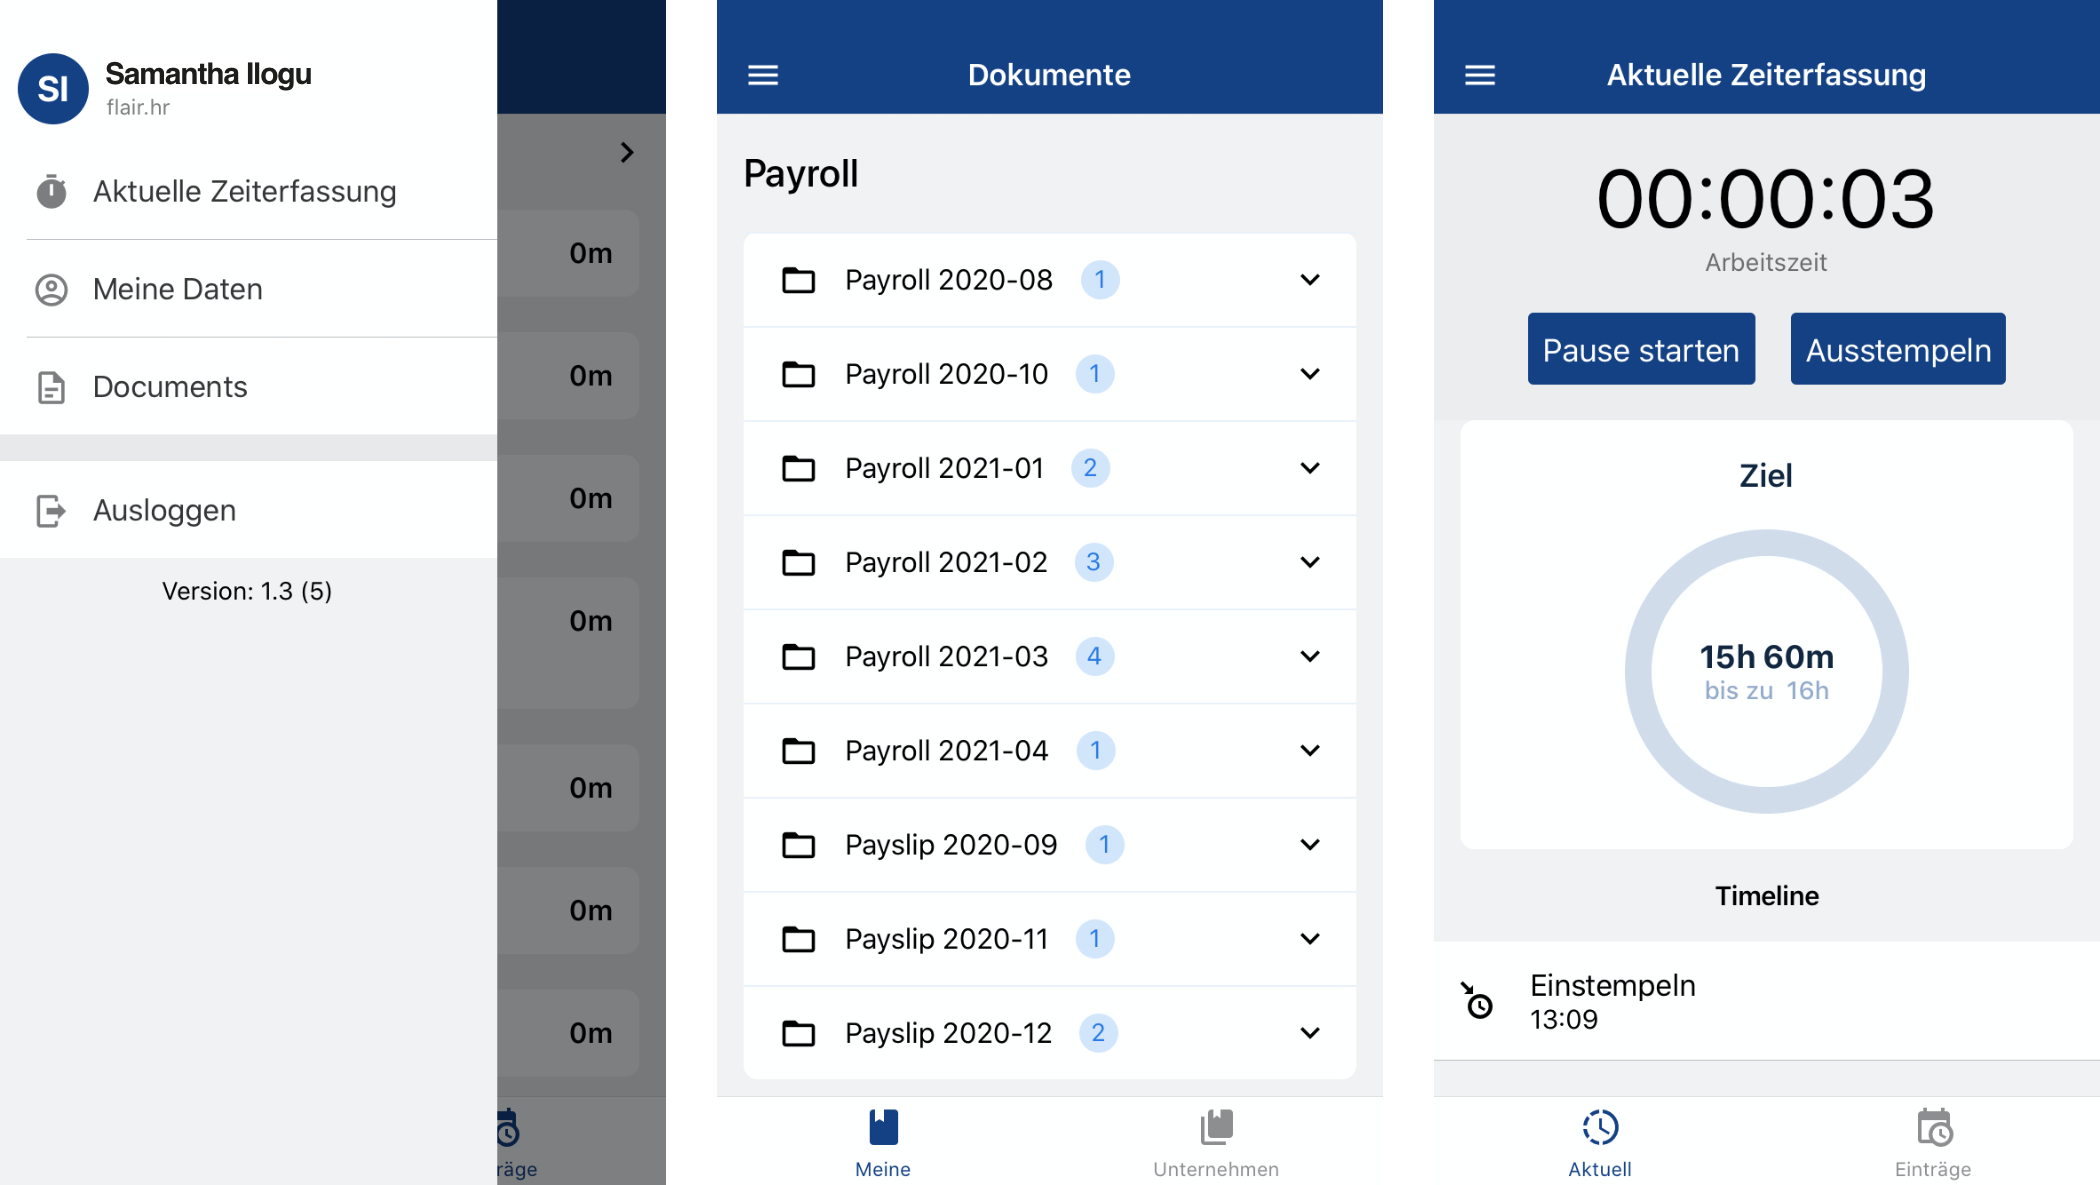 flair Software - Amongst many other things flair's employee HUB enables users to plan their shifts & absences, track time, access documents and request data changes. Our manager dashboard is perfect for managers and team leaders. Access employee HUB from a mobile now!